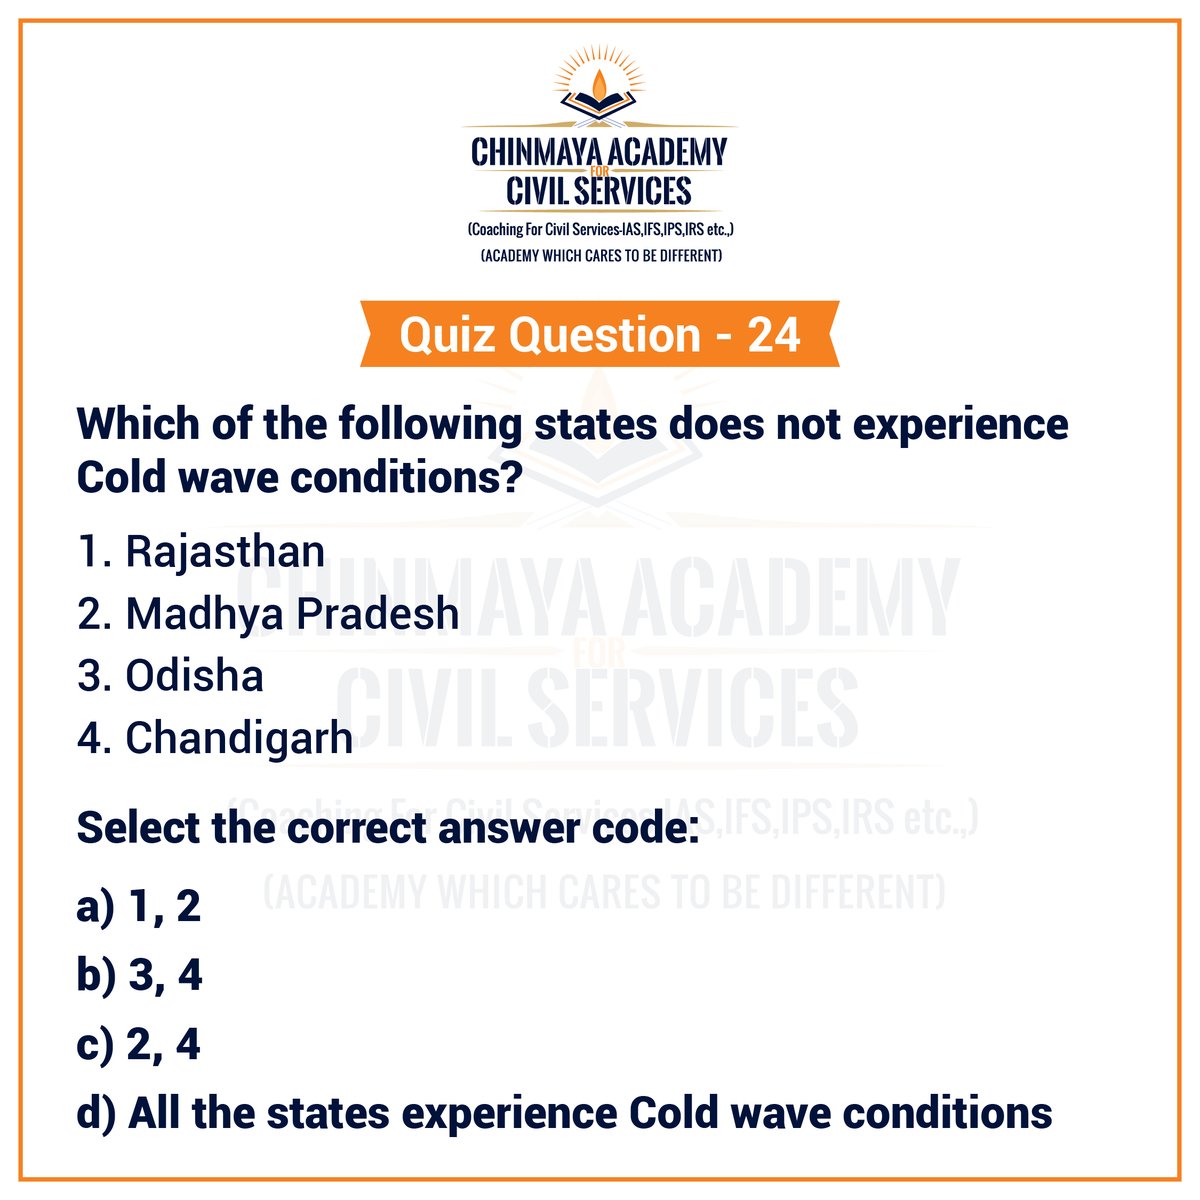 UPSC Quiz Time 🤩 Question Number - 24

✔️ The correct answer will be revealed on Saturday (12/06/2021)

Register today for online IAS coaching at chinmayaias.com or call us +91 – 98413 80738 / +91 – 98407 01008 for more details.

#chinmayaias #upsc #currentaffairsquiz